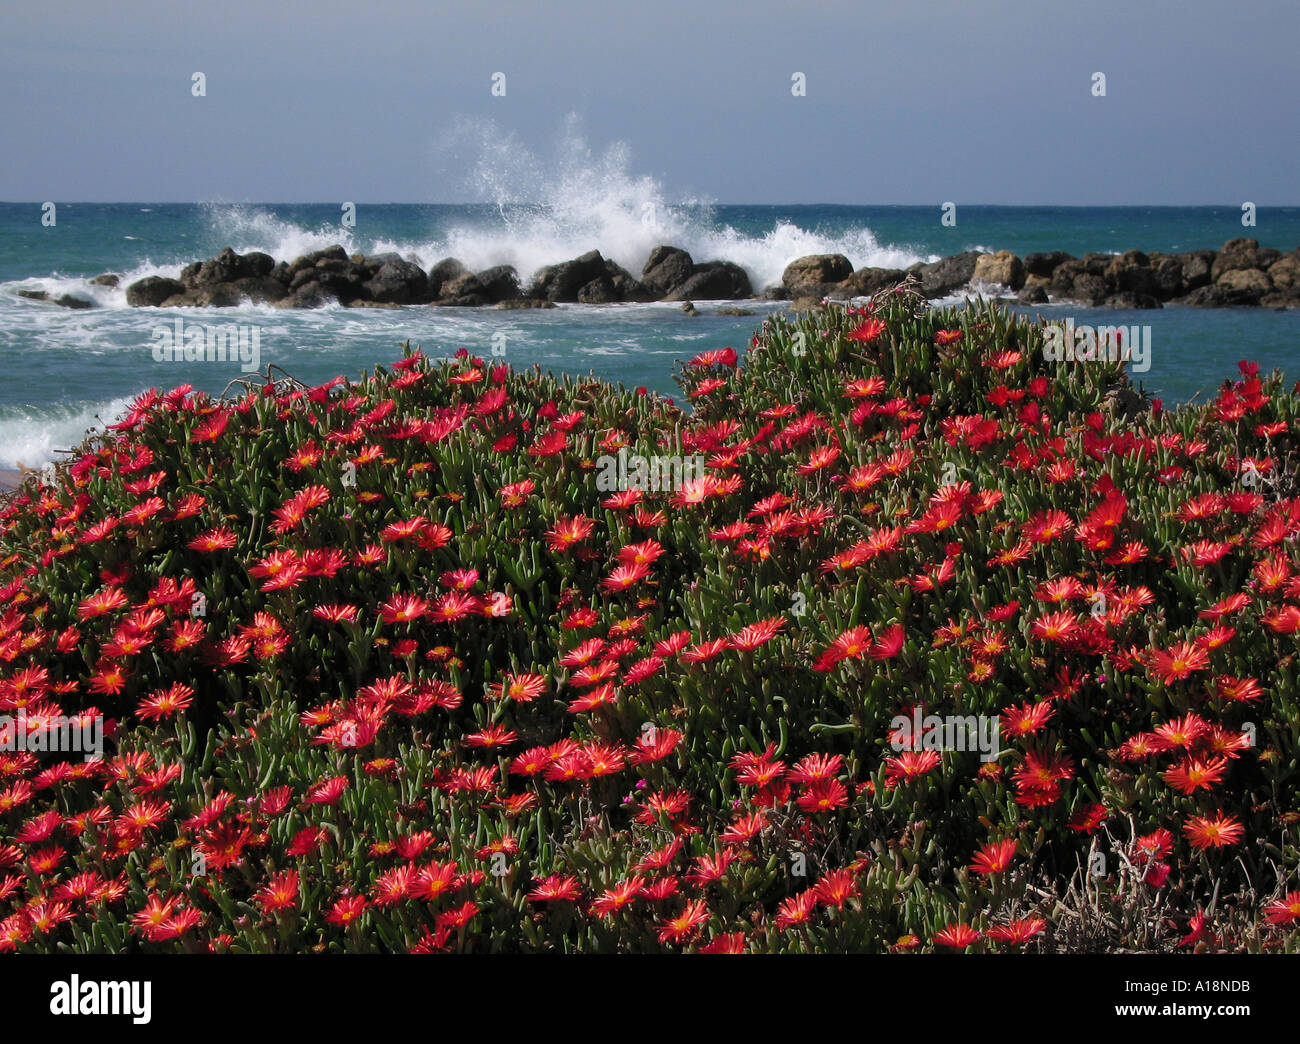 Vivid daisy like flowers growing on rocks on a beach in Southern Cyprus with the sea crashing in the background i Stock Photo